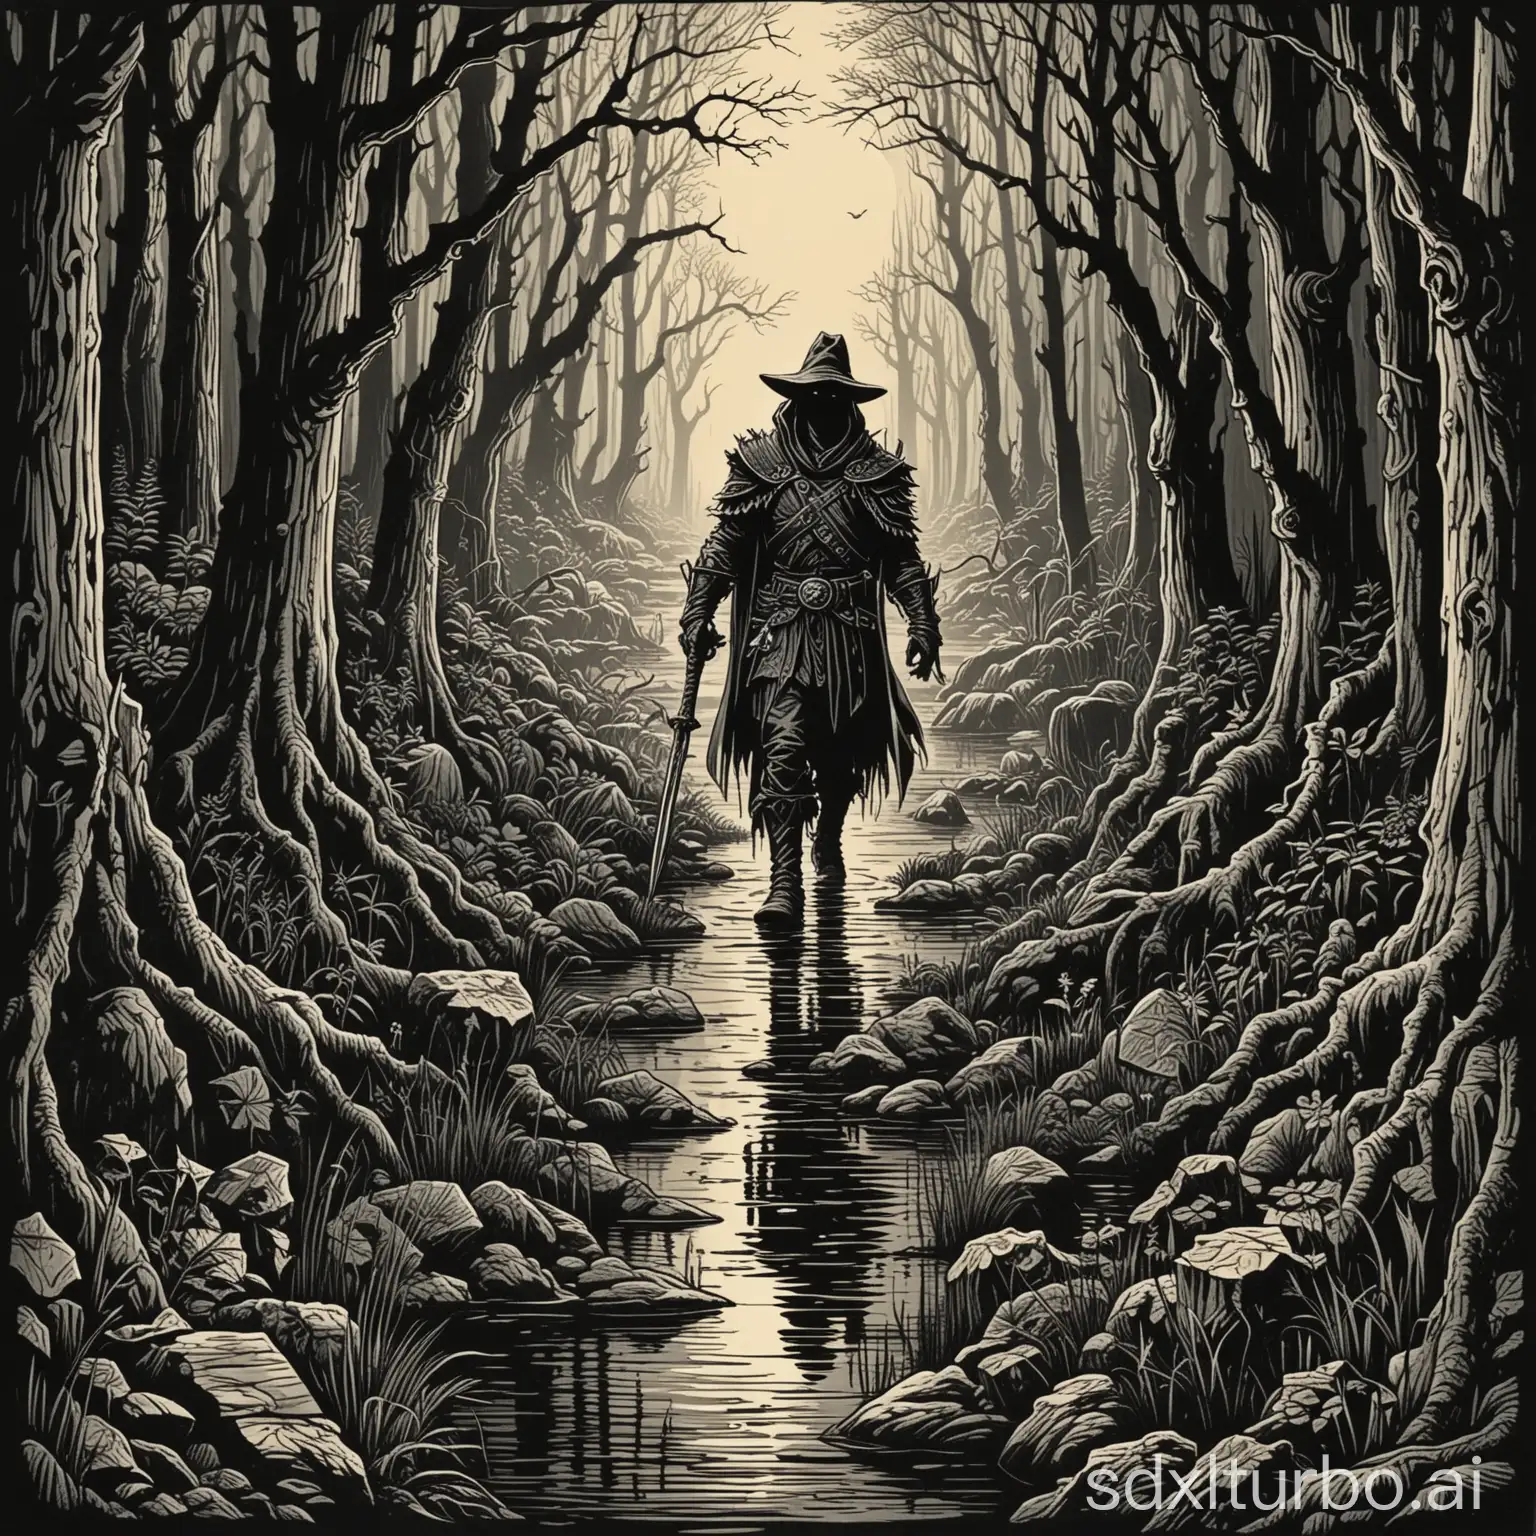 style of 1978 Dungeons and Dragons, by Jeff Dee, 1bit bw, woodcut, a scarecrow:warlock, in a dark swamp forest,